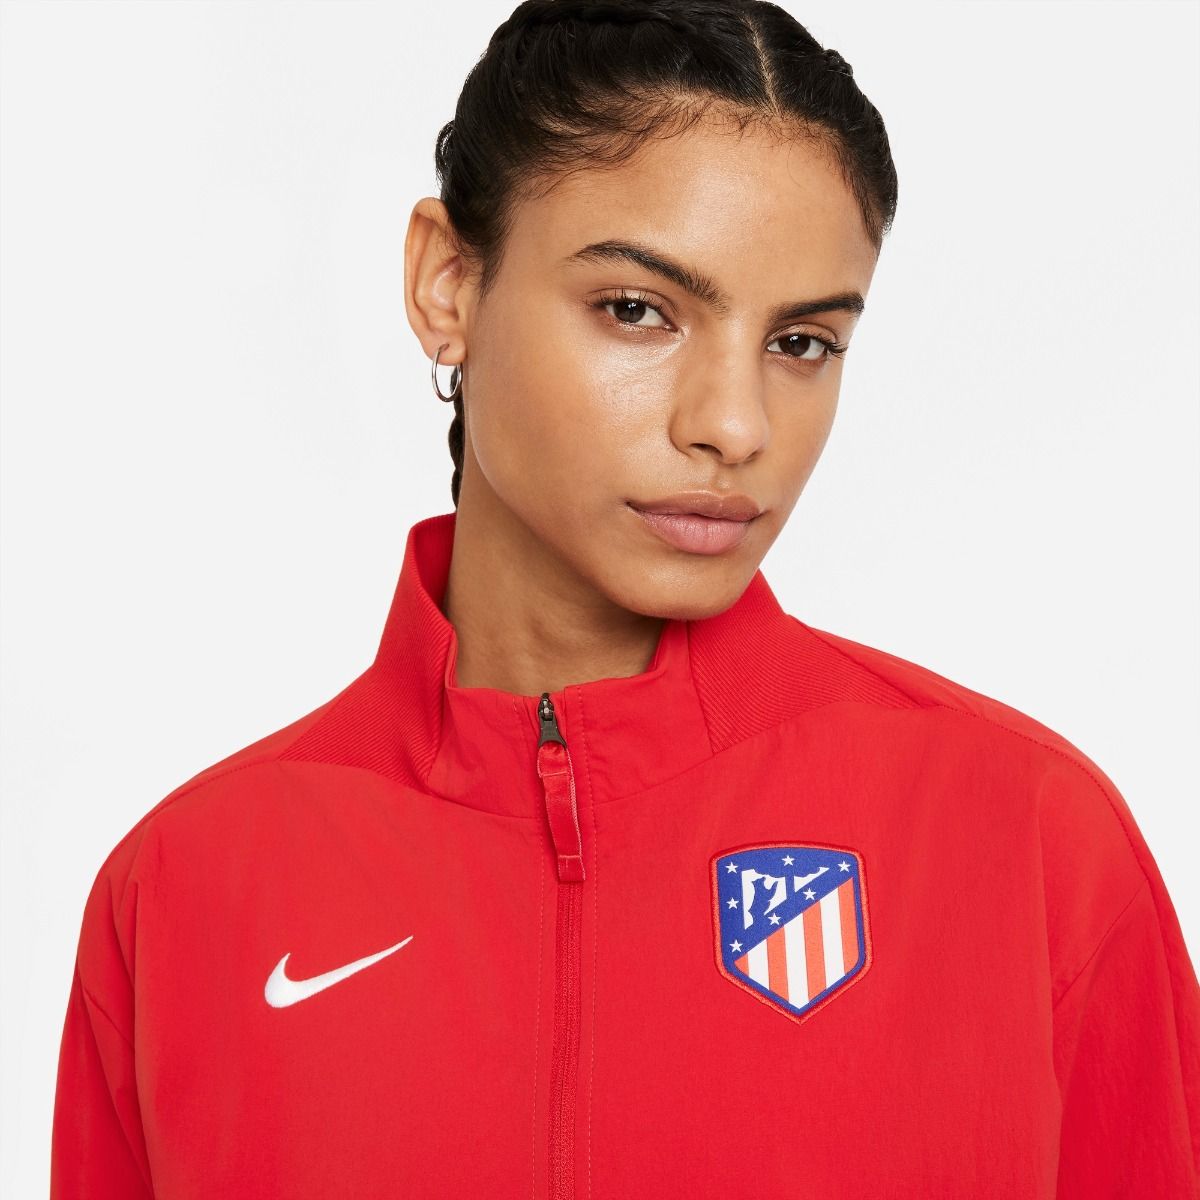 CHAQUETA ENTRENAMIENTO MUJER 21/22 NIKE image number null